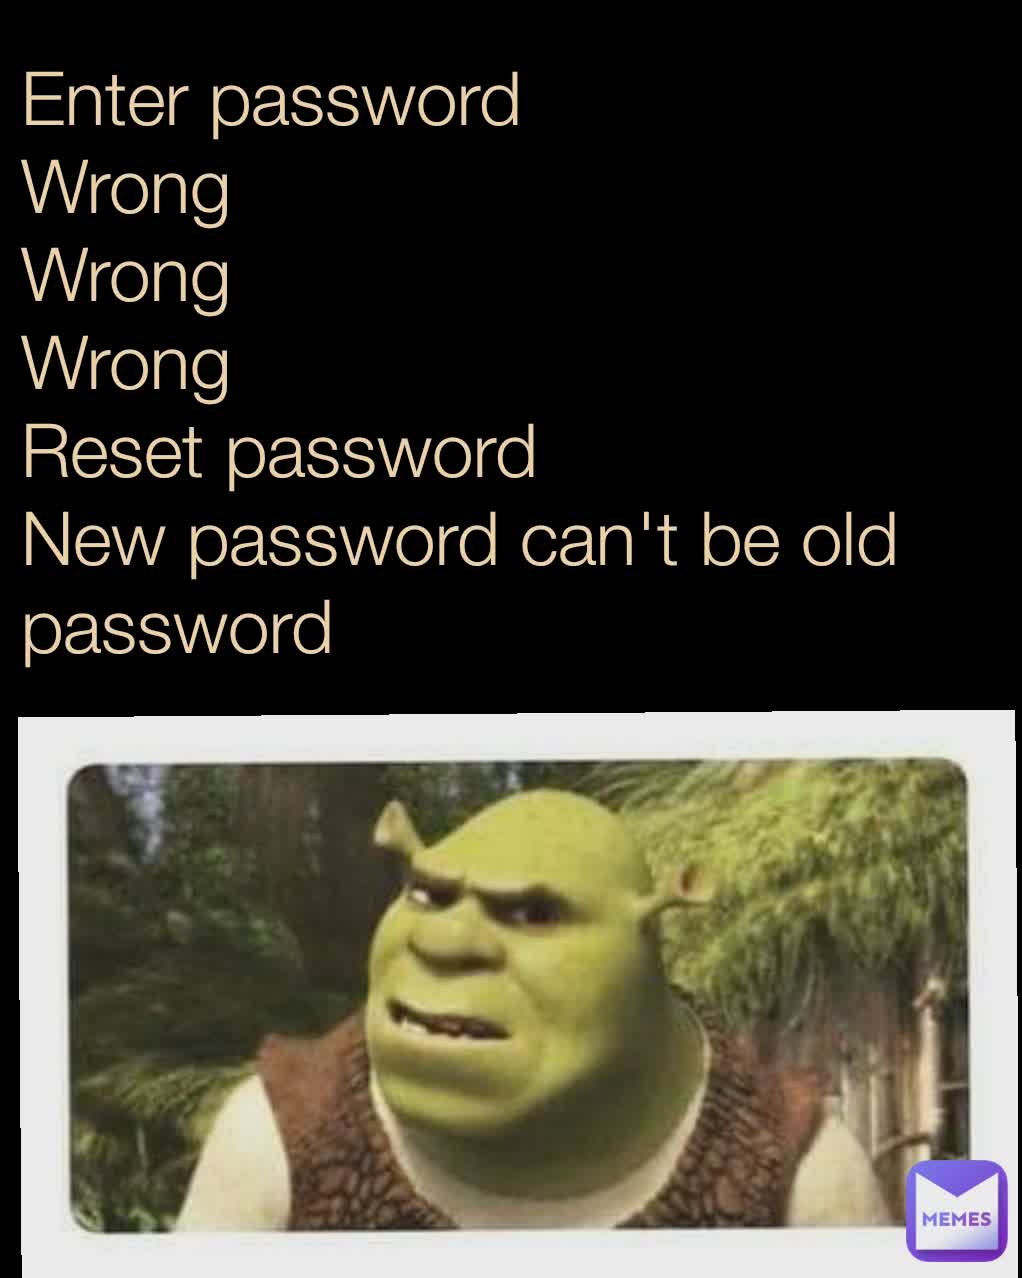 Enter password
Wrong
Wrong
Wrong
Reset password
New password can't be old password